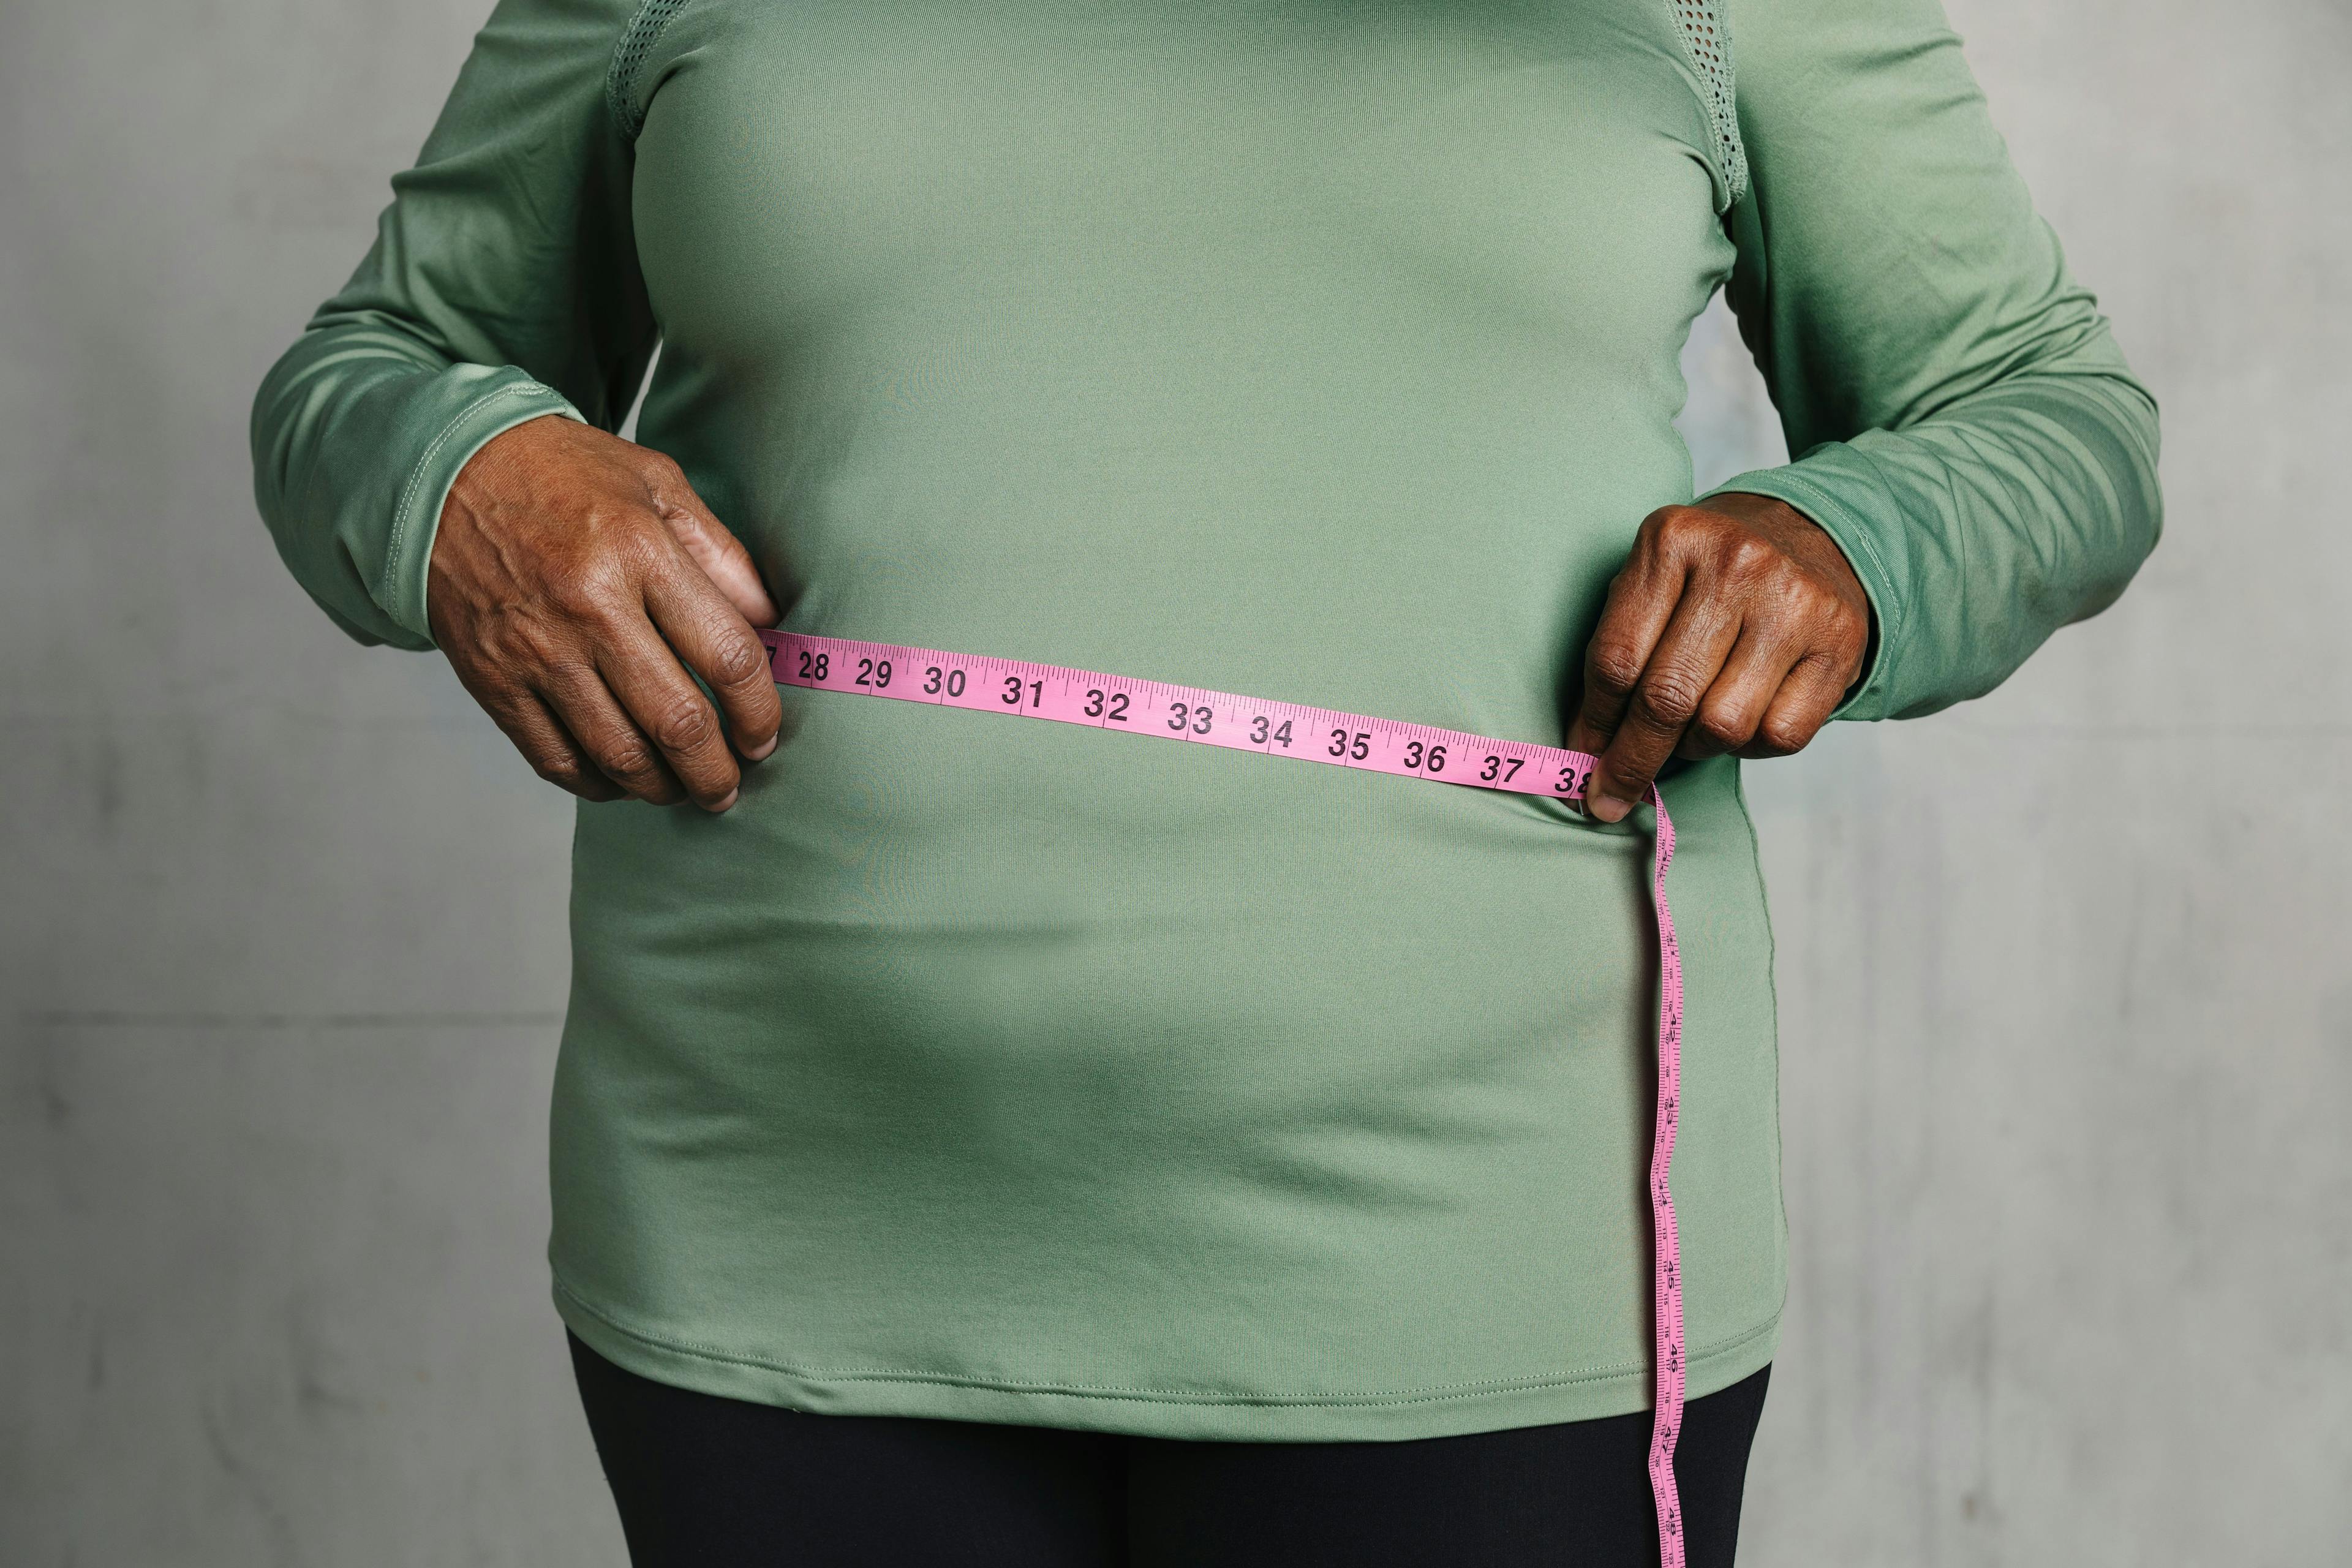 Women's Preventive Services Initiative releases guidance for preventing obesity in midlife